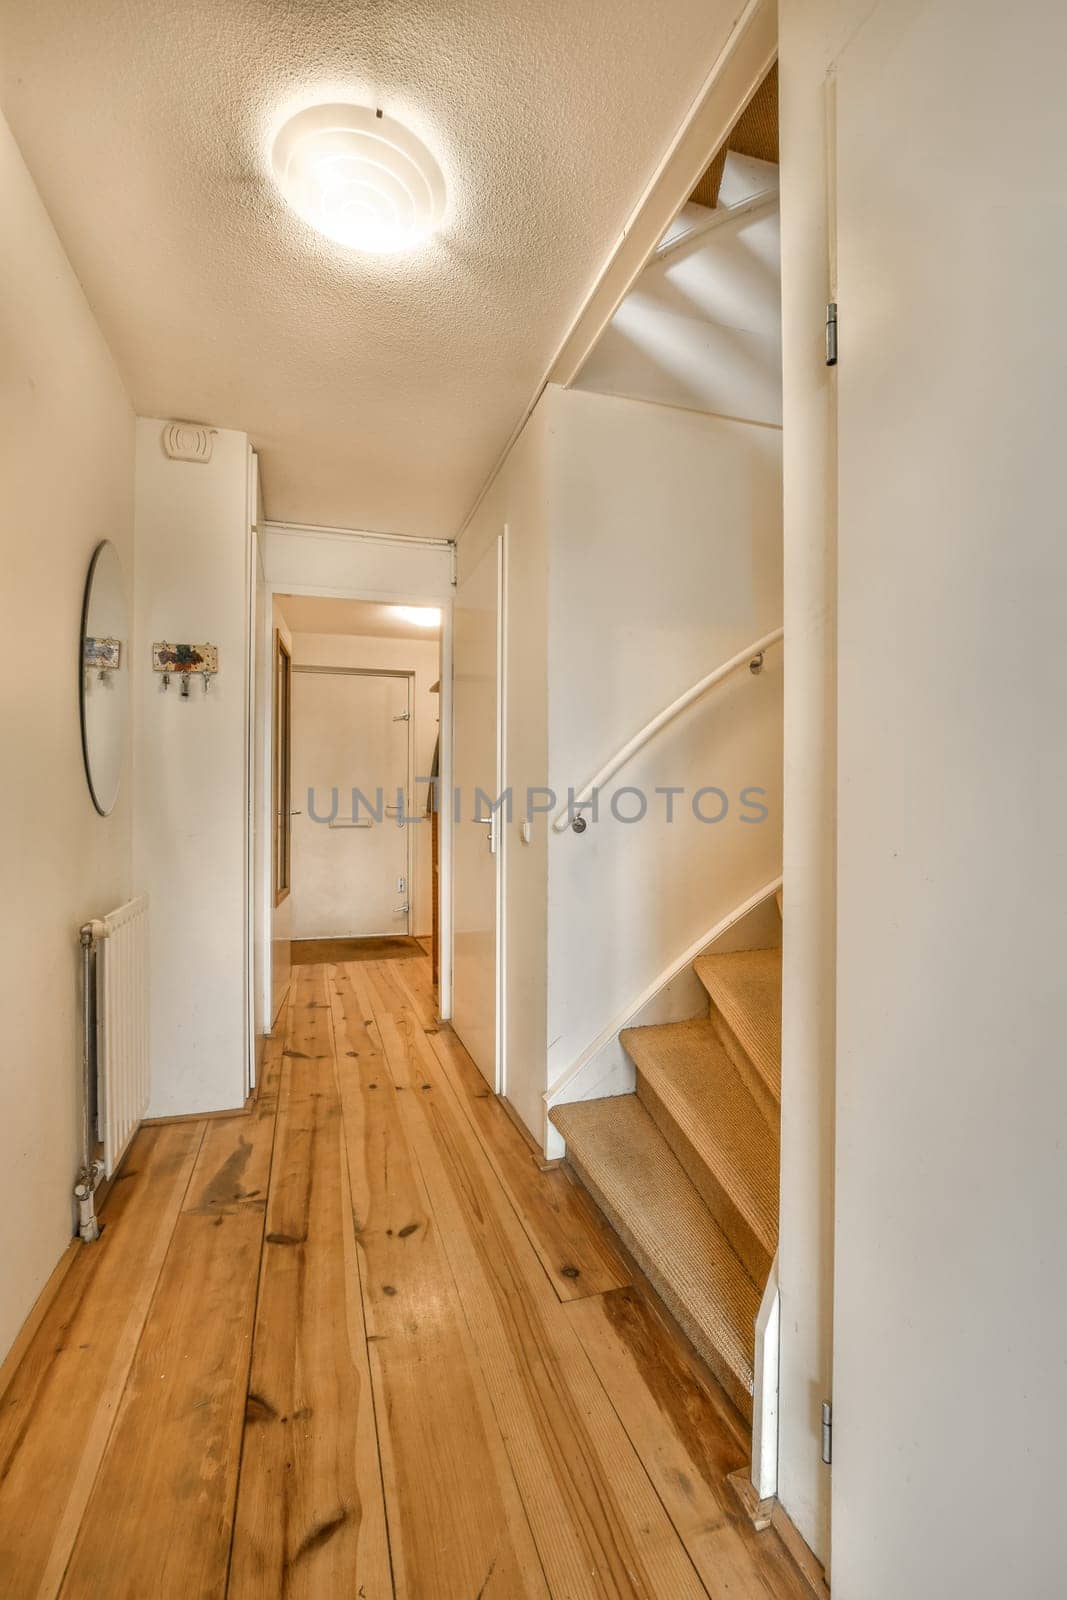 an empty room with wood flooring and white walls on either side of the room there is a staircase leading up to the second